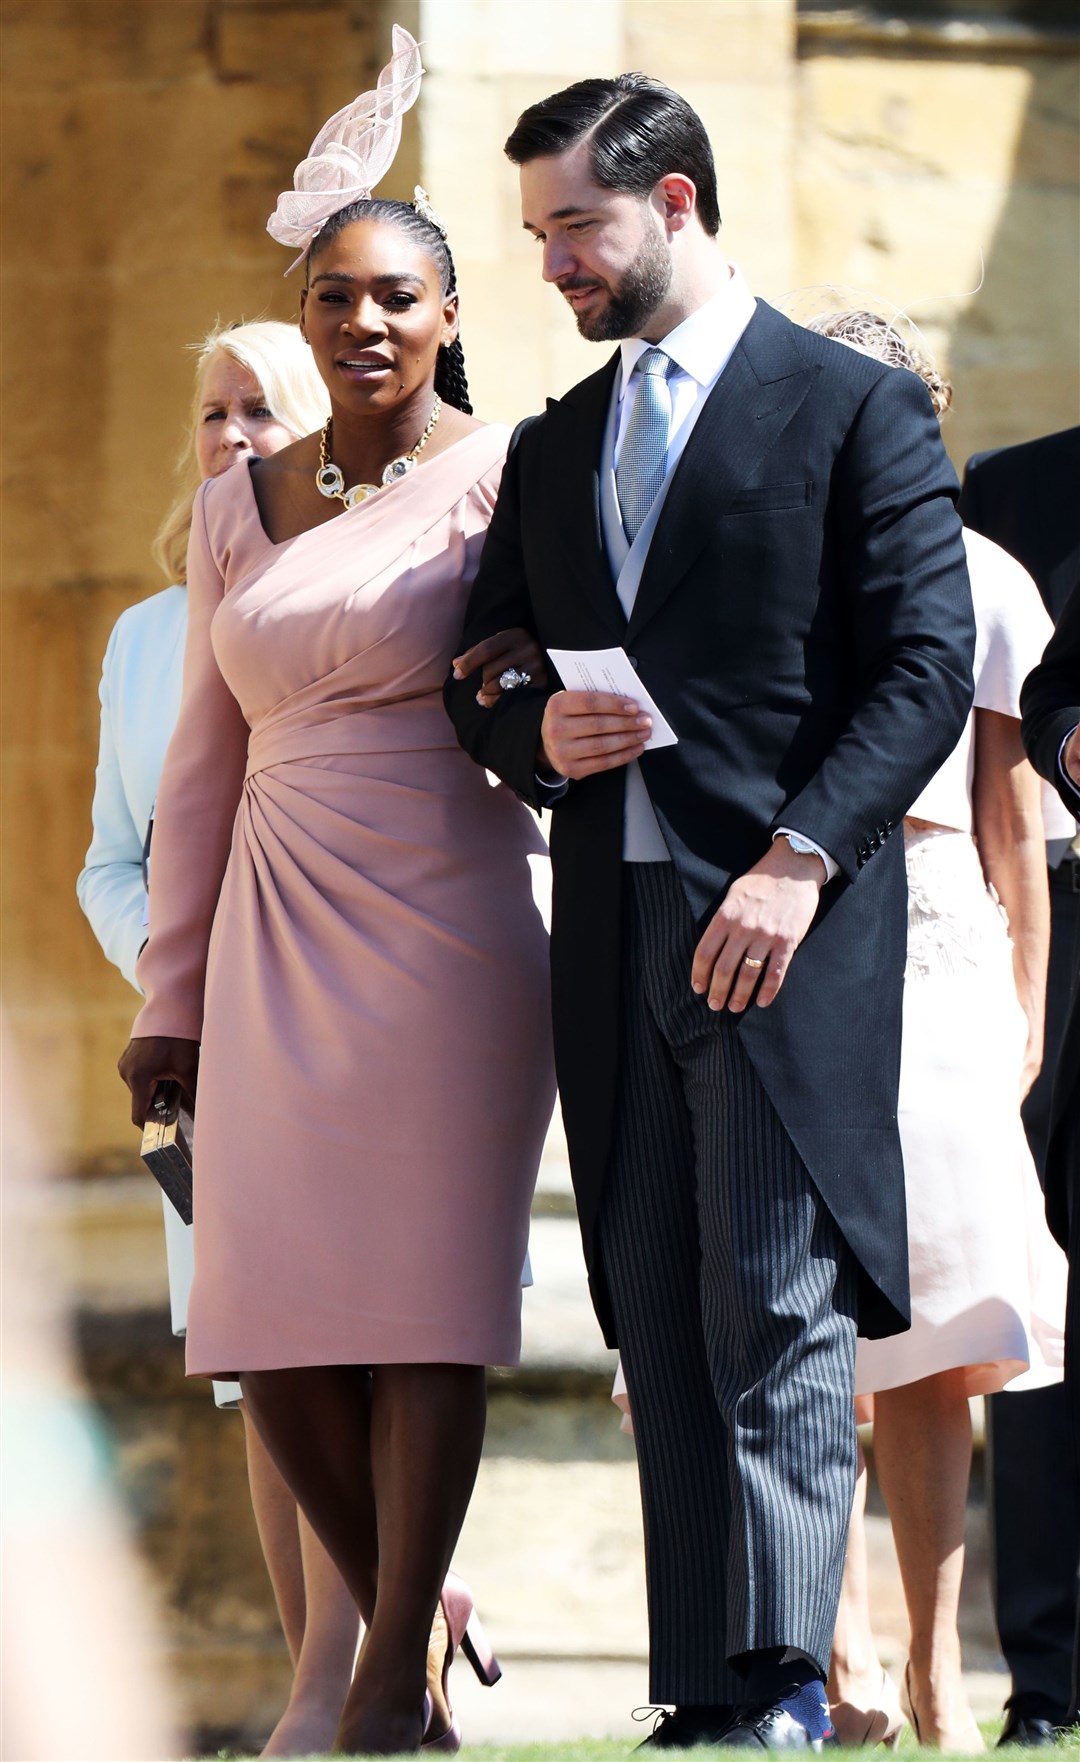 US tennis player Serena Williams and her husband Alexis Ohanian arrive at St George’s Chapel in Windsor Castle for the wedding of Prince Harry and Meghan Markle (Chris Jackson/PA)